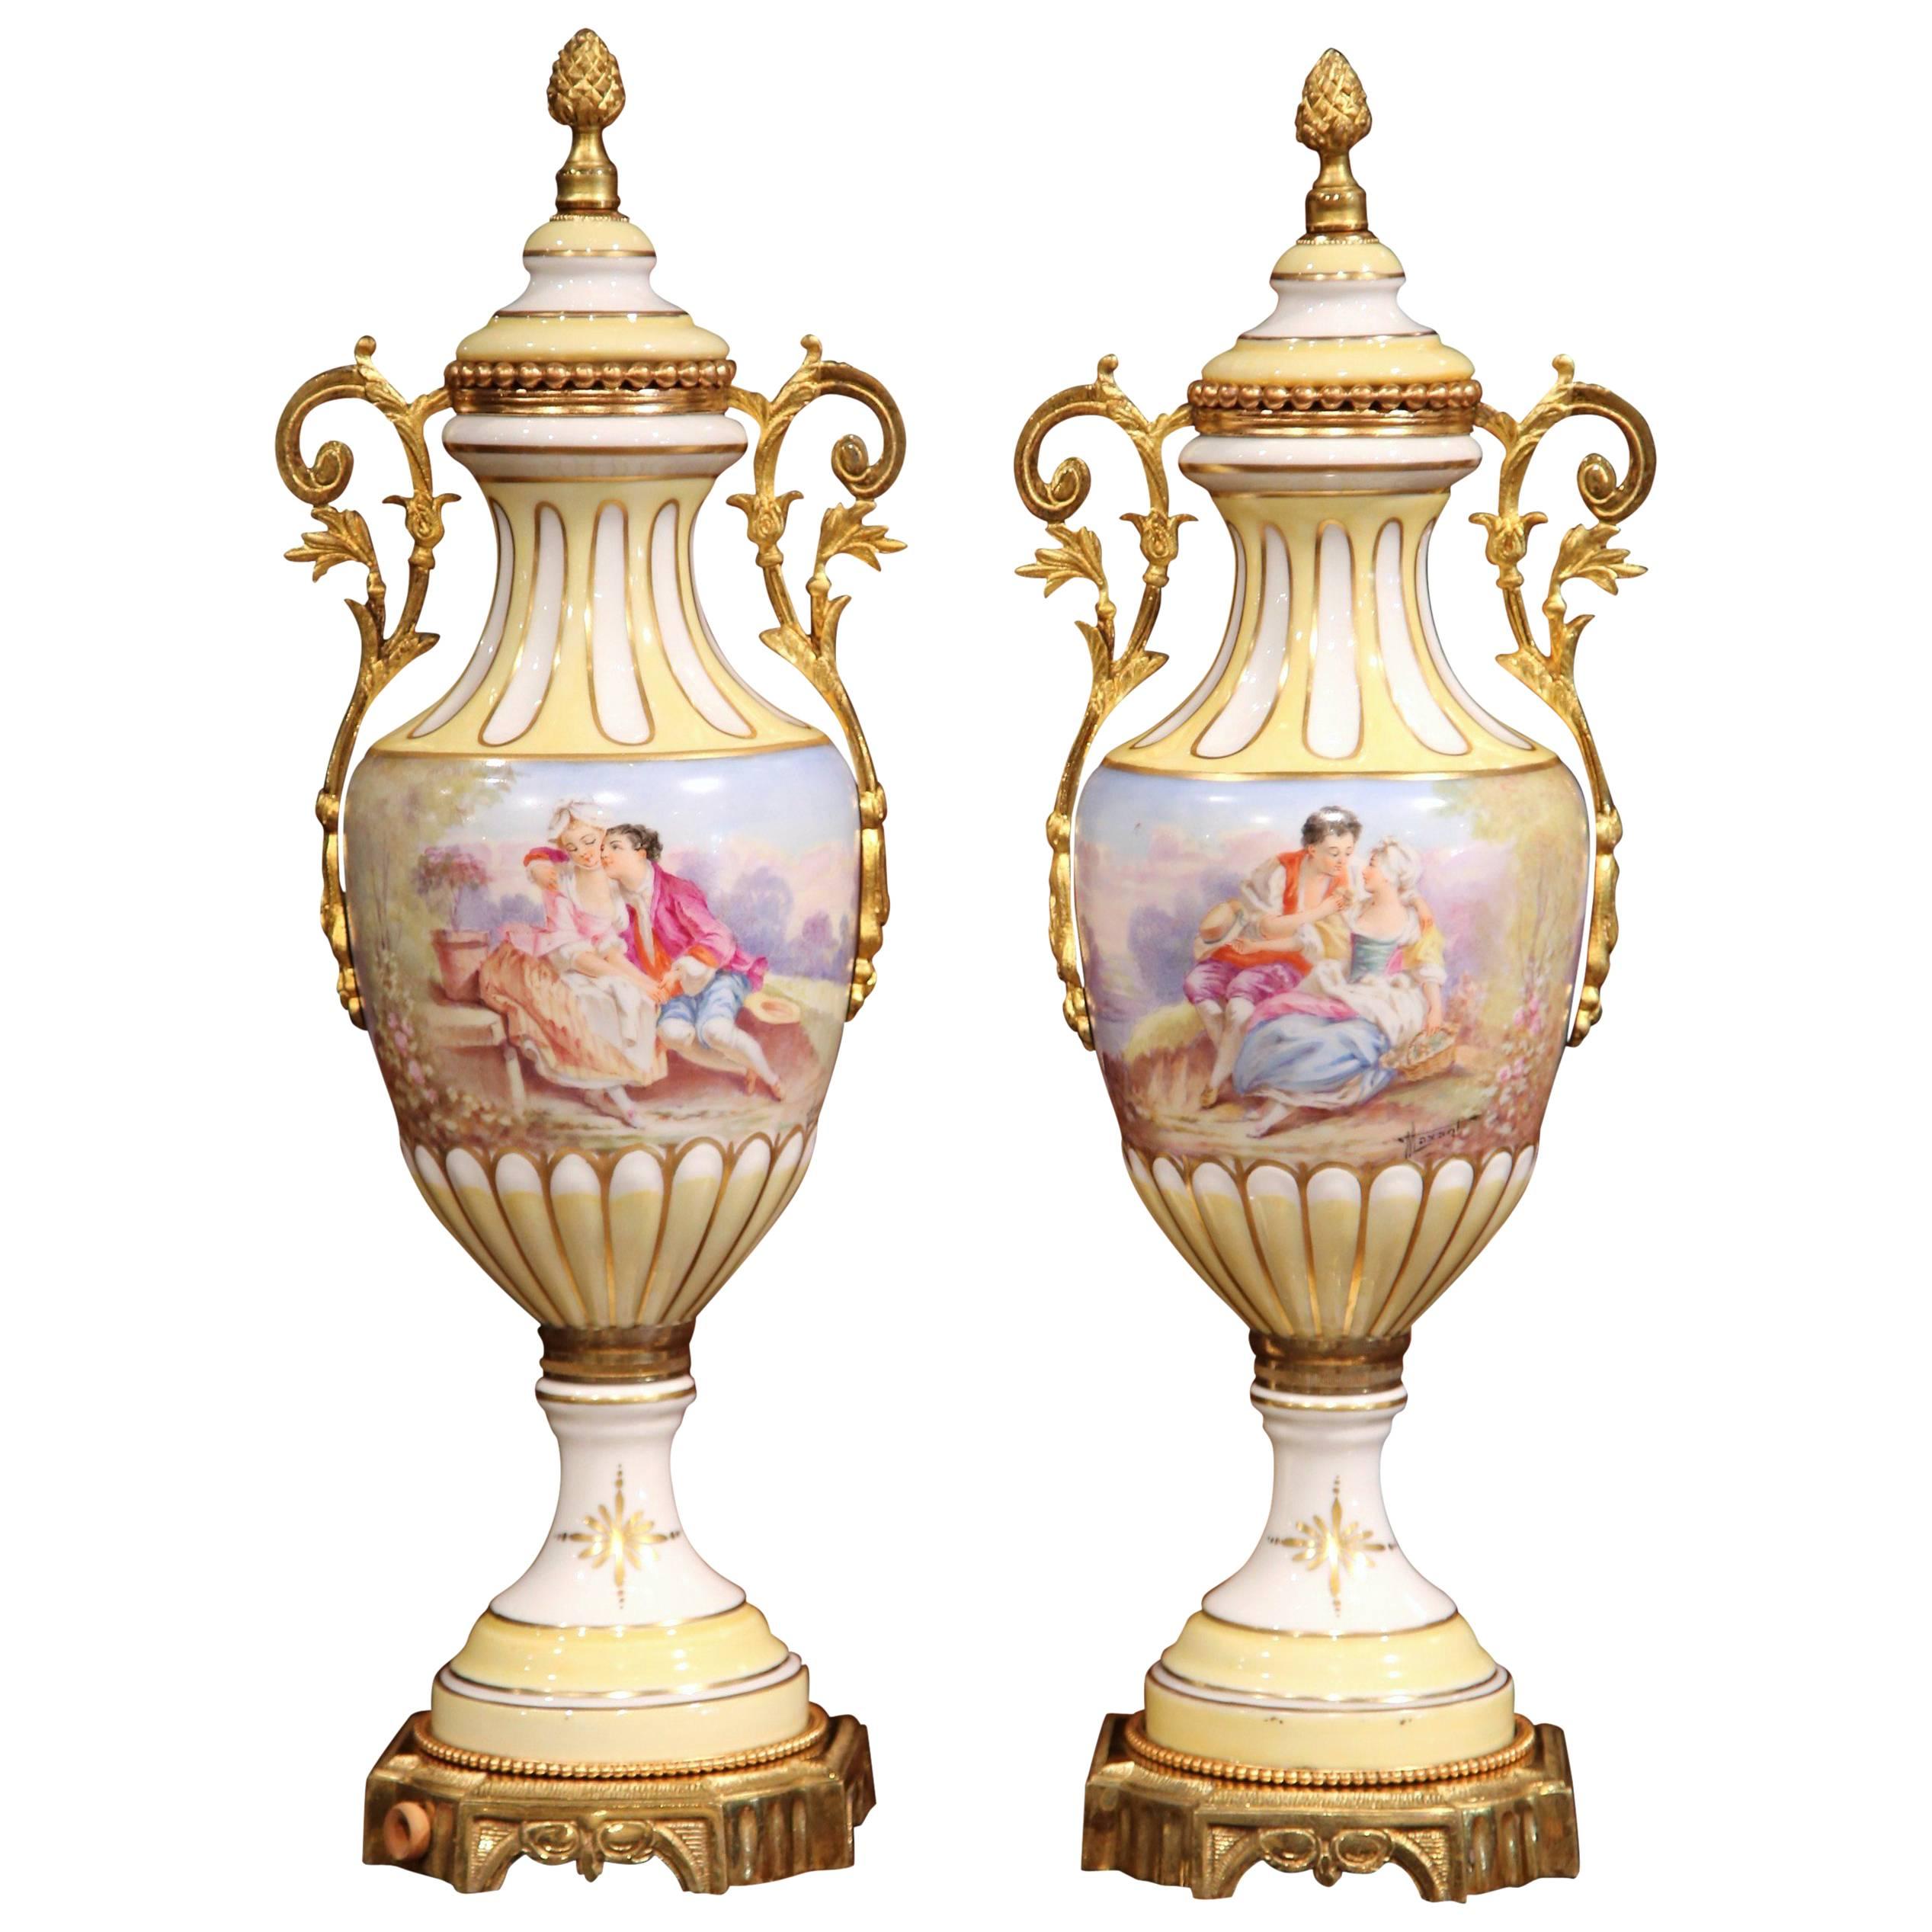 Pair of 19th Century French Painted Porcelain and Bronze Vases Signed Maxant